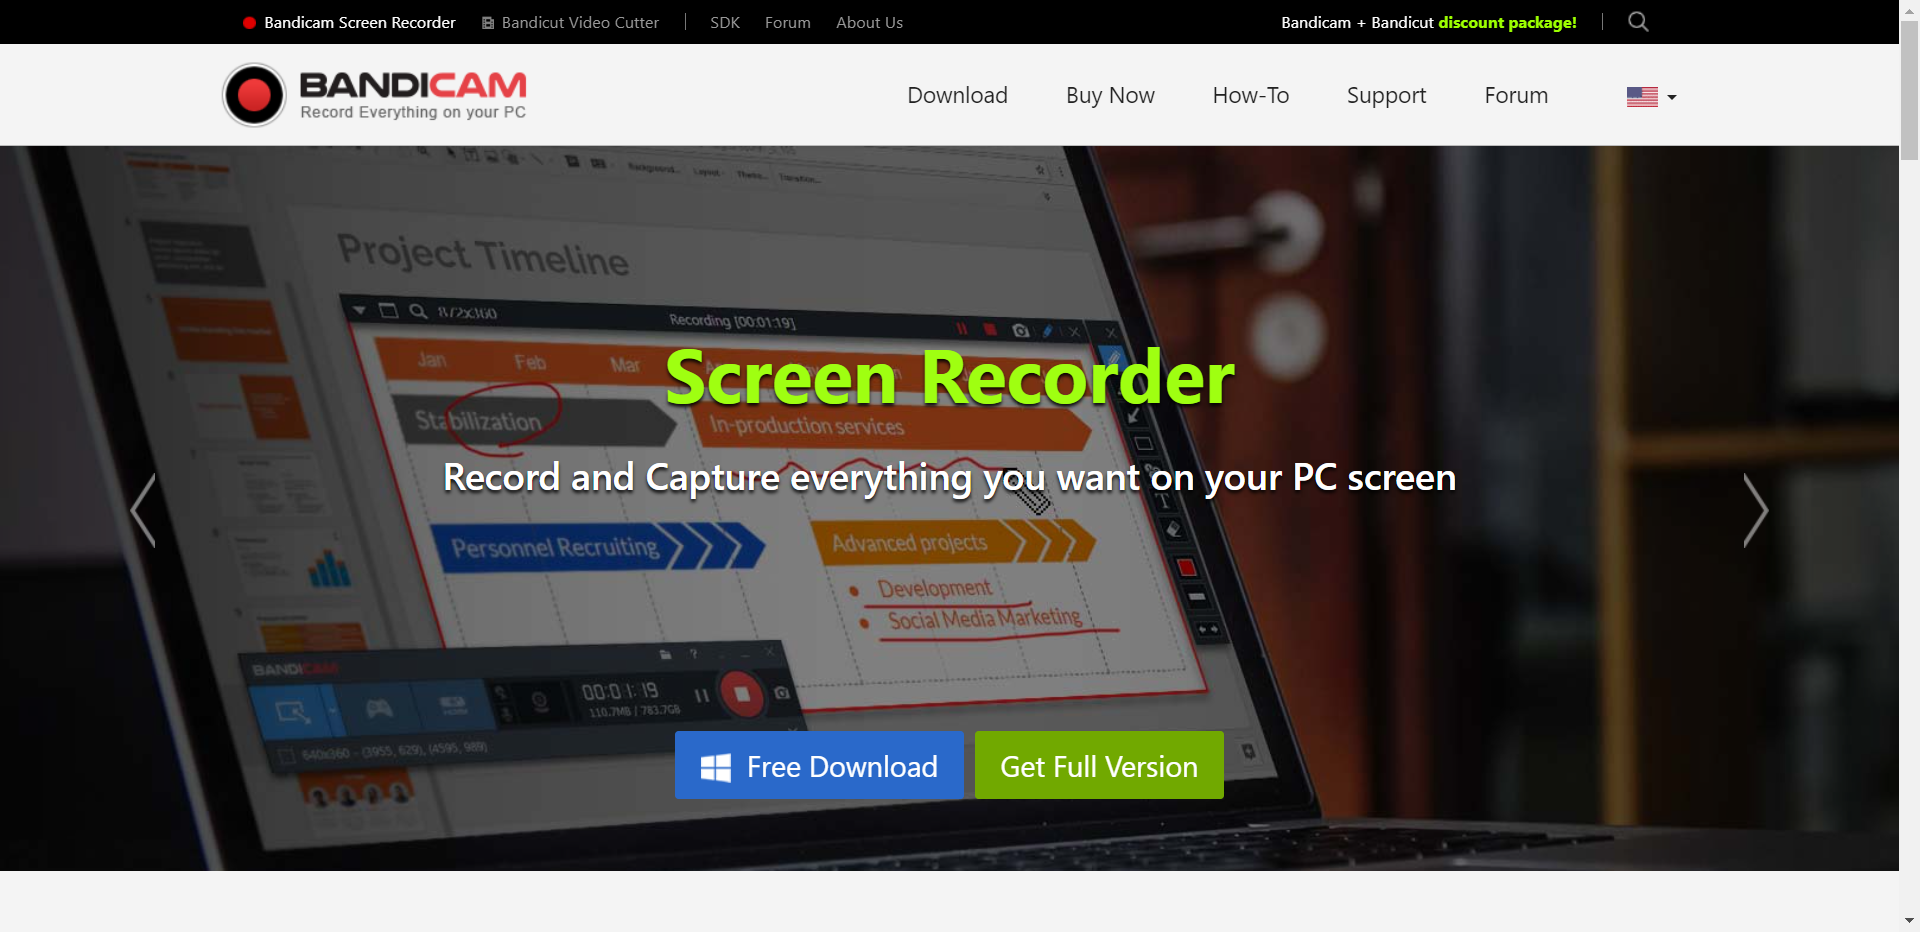 Screen-Recording-Software-capture-anything-on-your-PC-screen-Bandicam